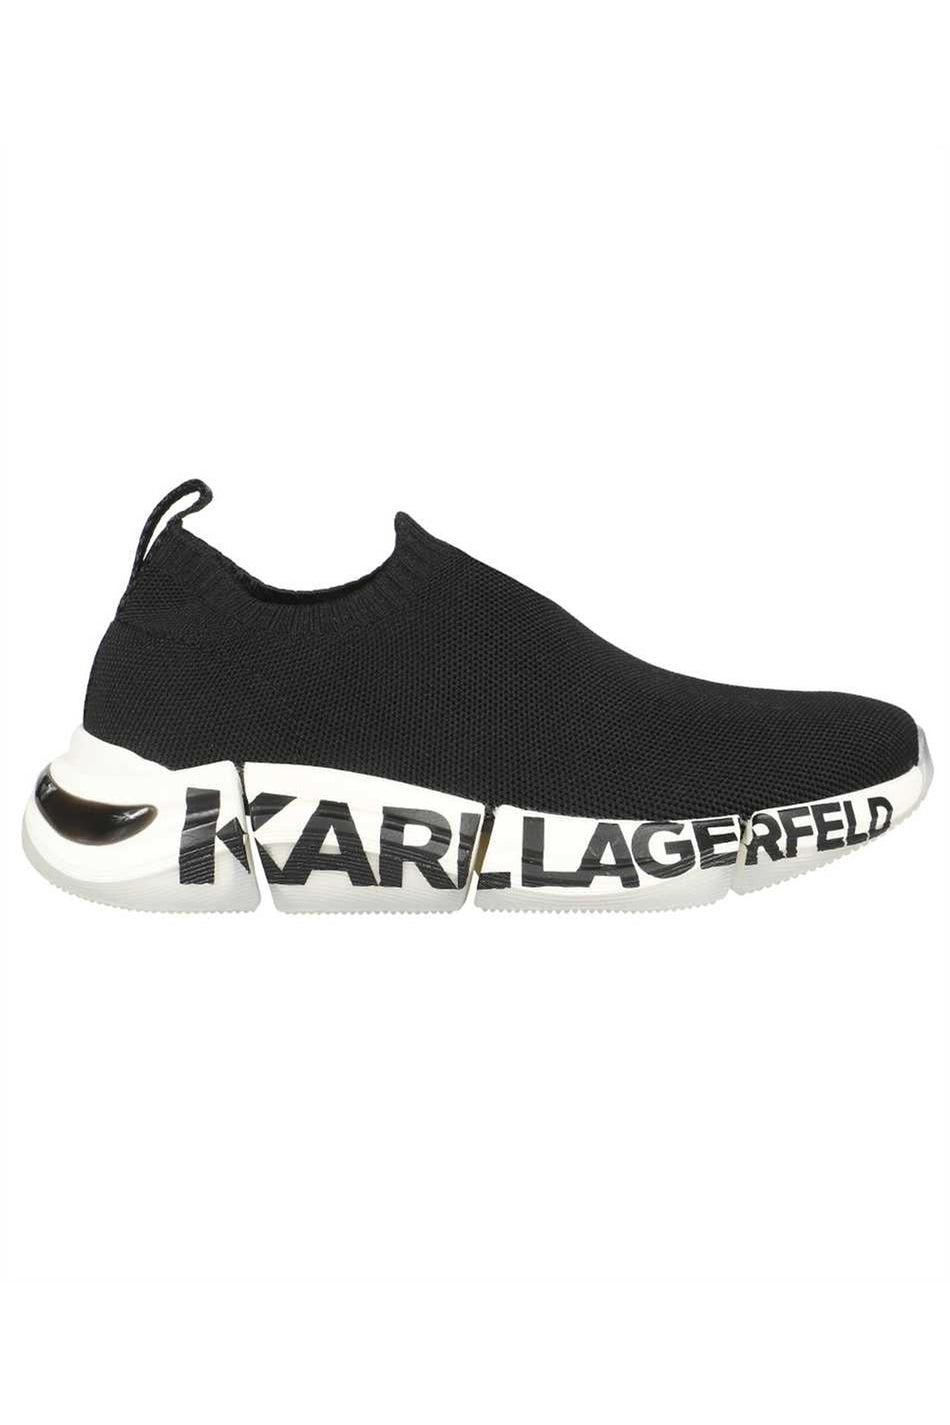 Low-top sneakers-Karl Lagerfeld-OUTLET-SALE-37-ARCHIVIST